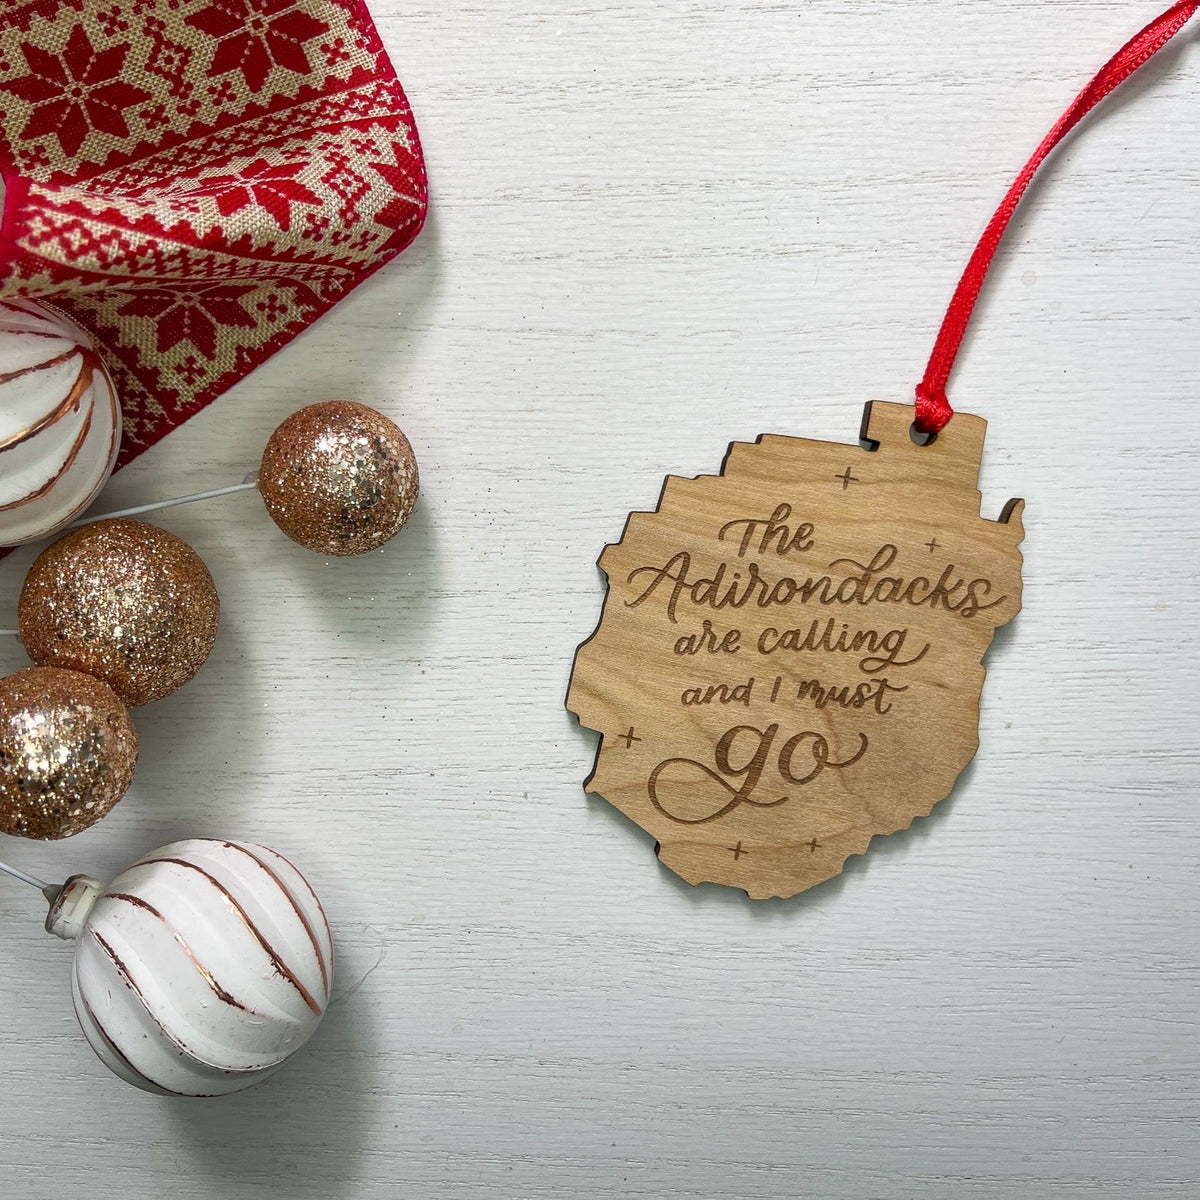 The Adirondacks are Calling and I Must Go Wood Ornament